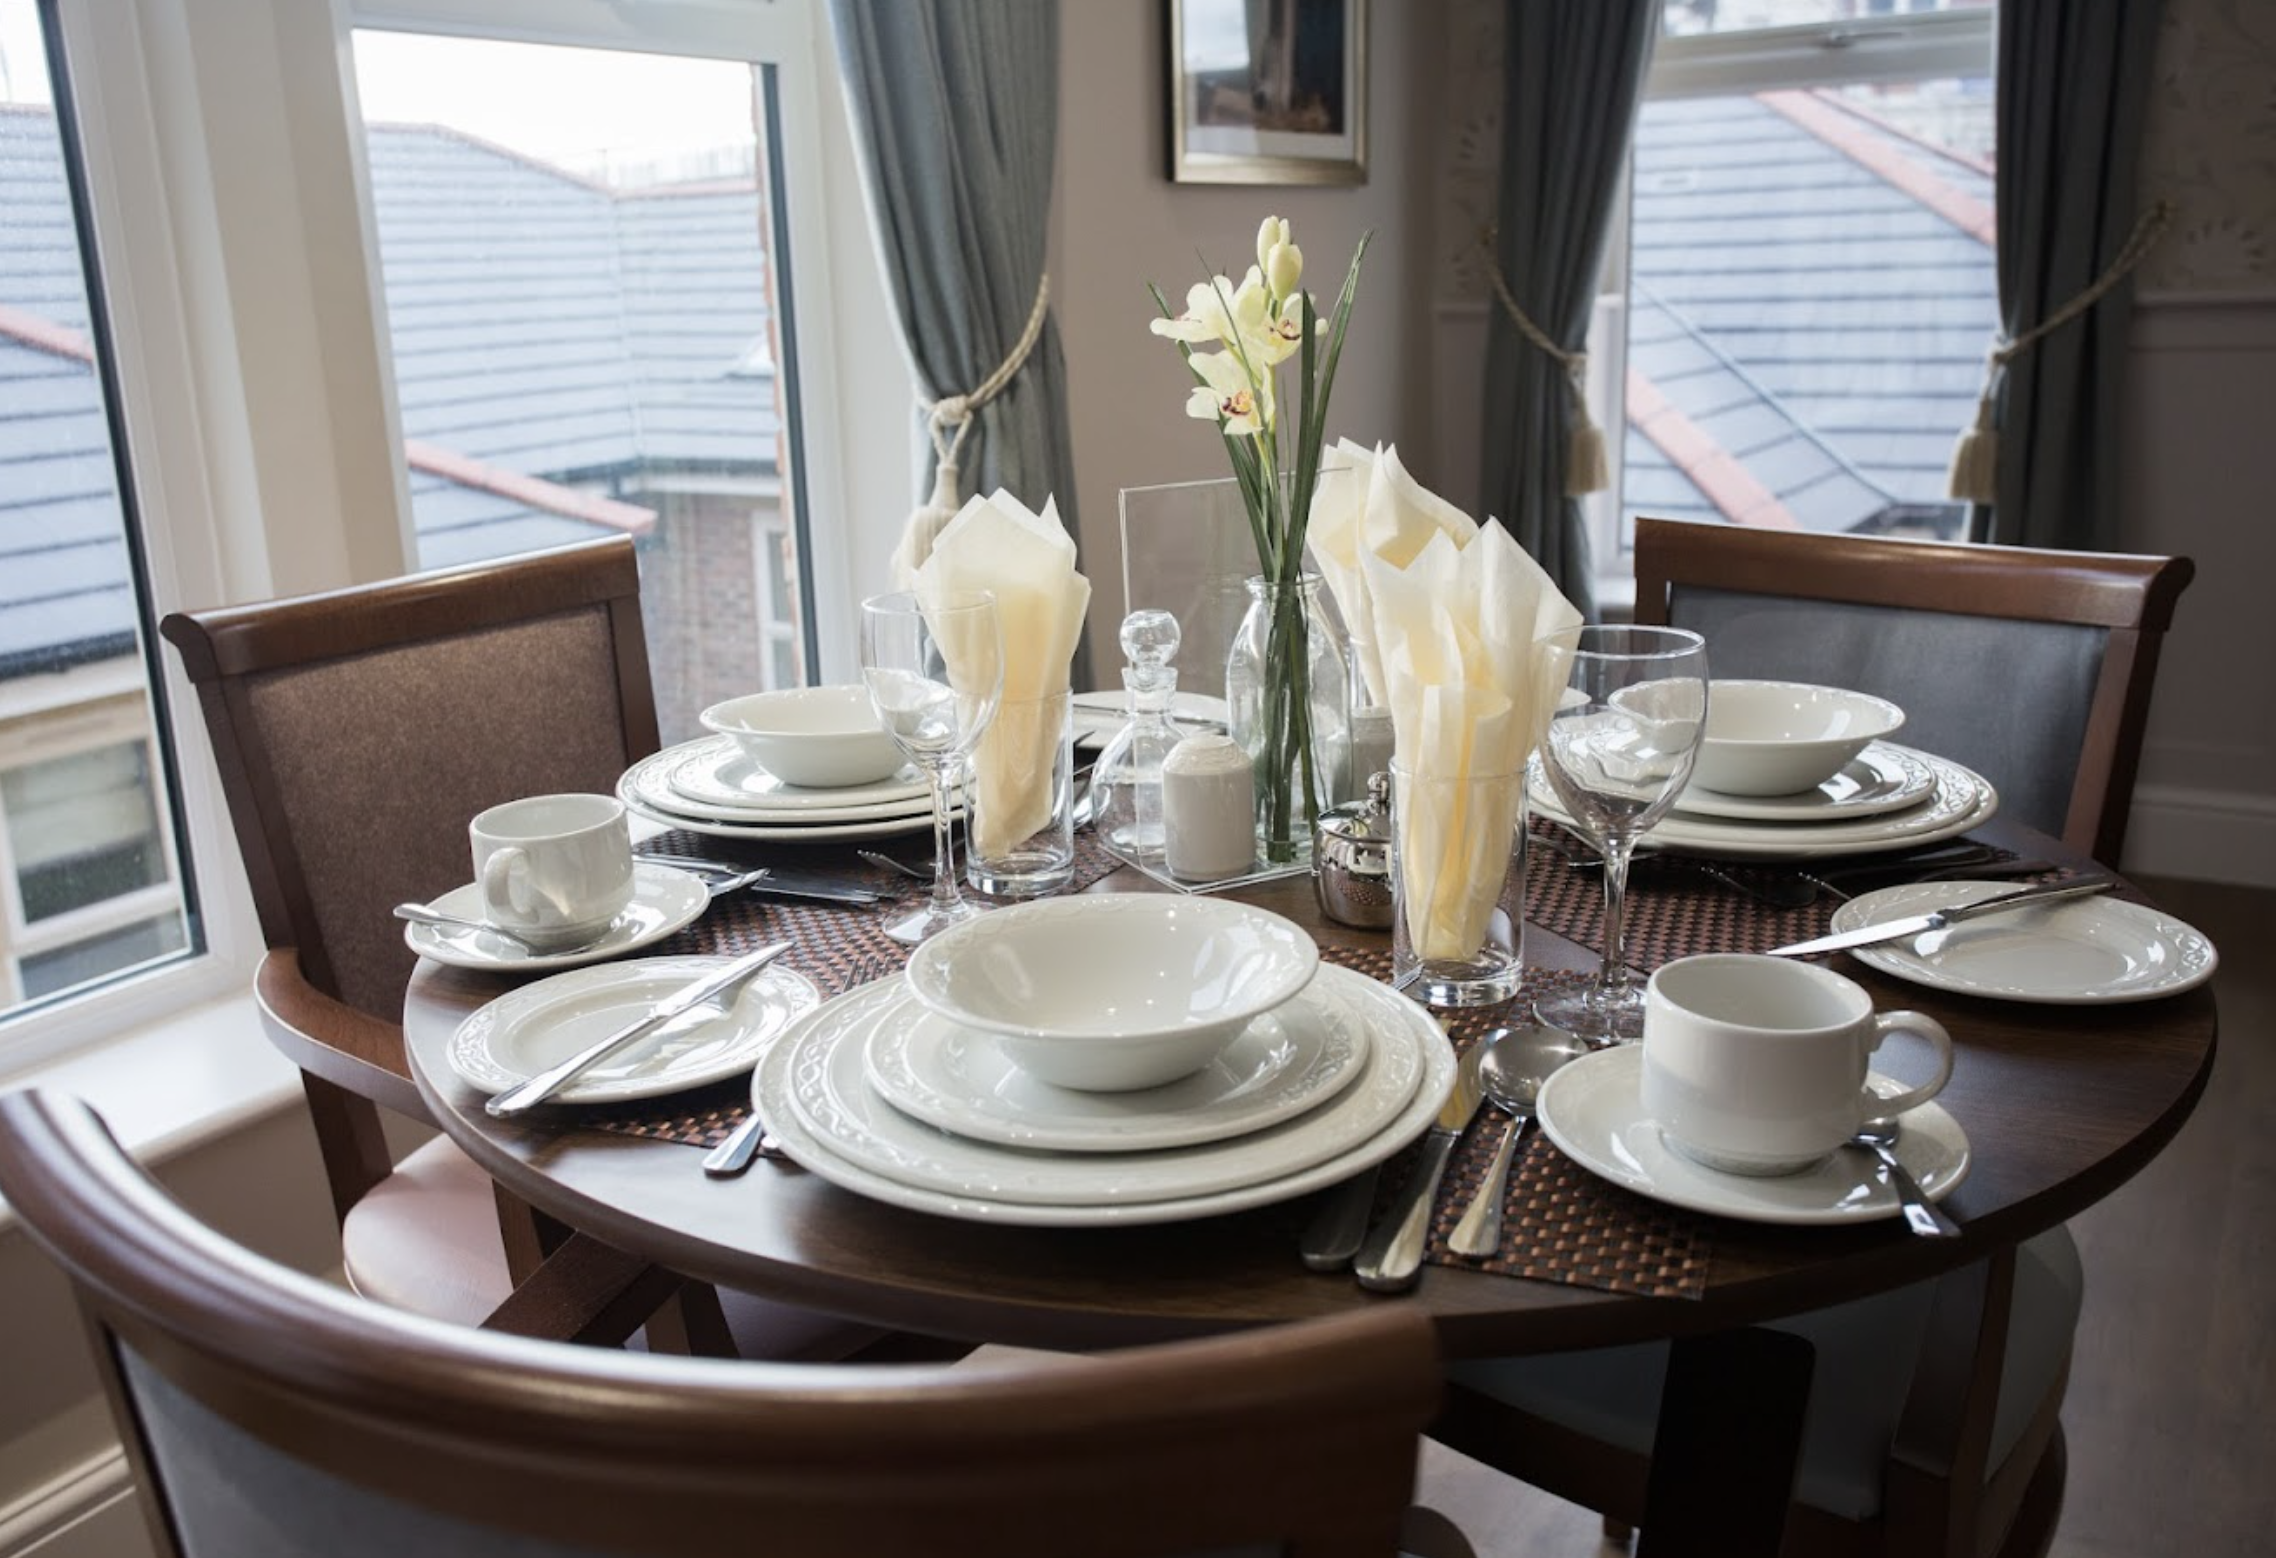 Dining room of Wykebeck Court care home in Leeds, Yorkshire